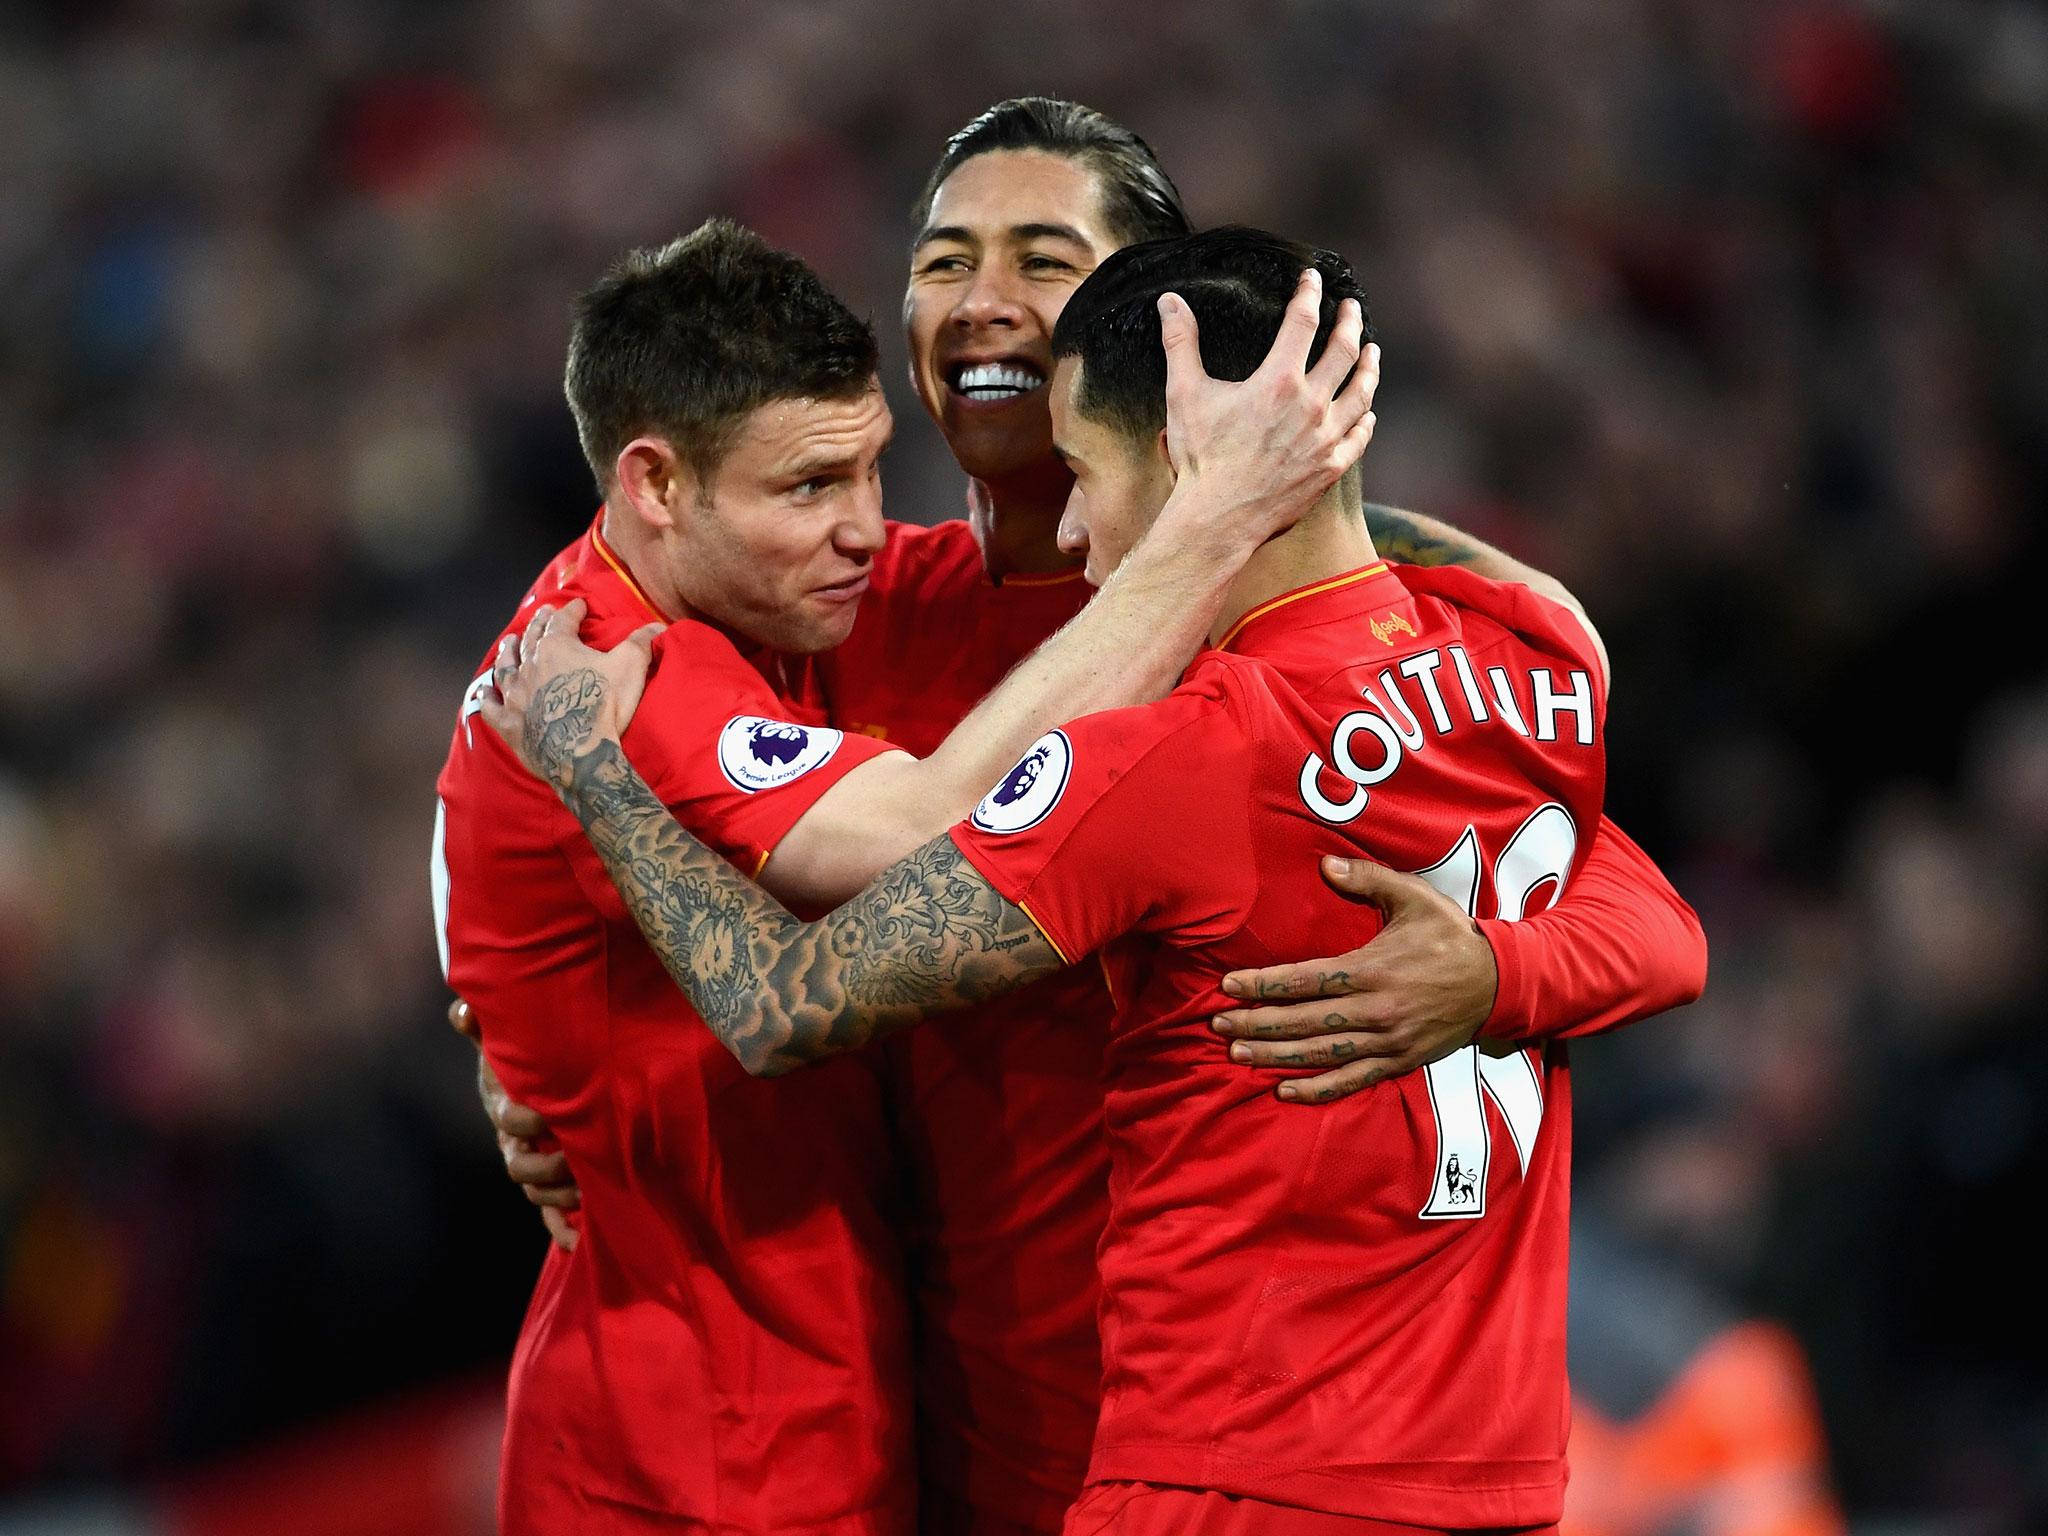 Roberto Firmino was instrumental in Liverpool's emphatic 3-1 defeat of Arsenal